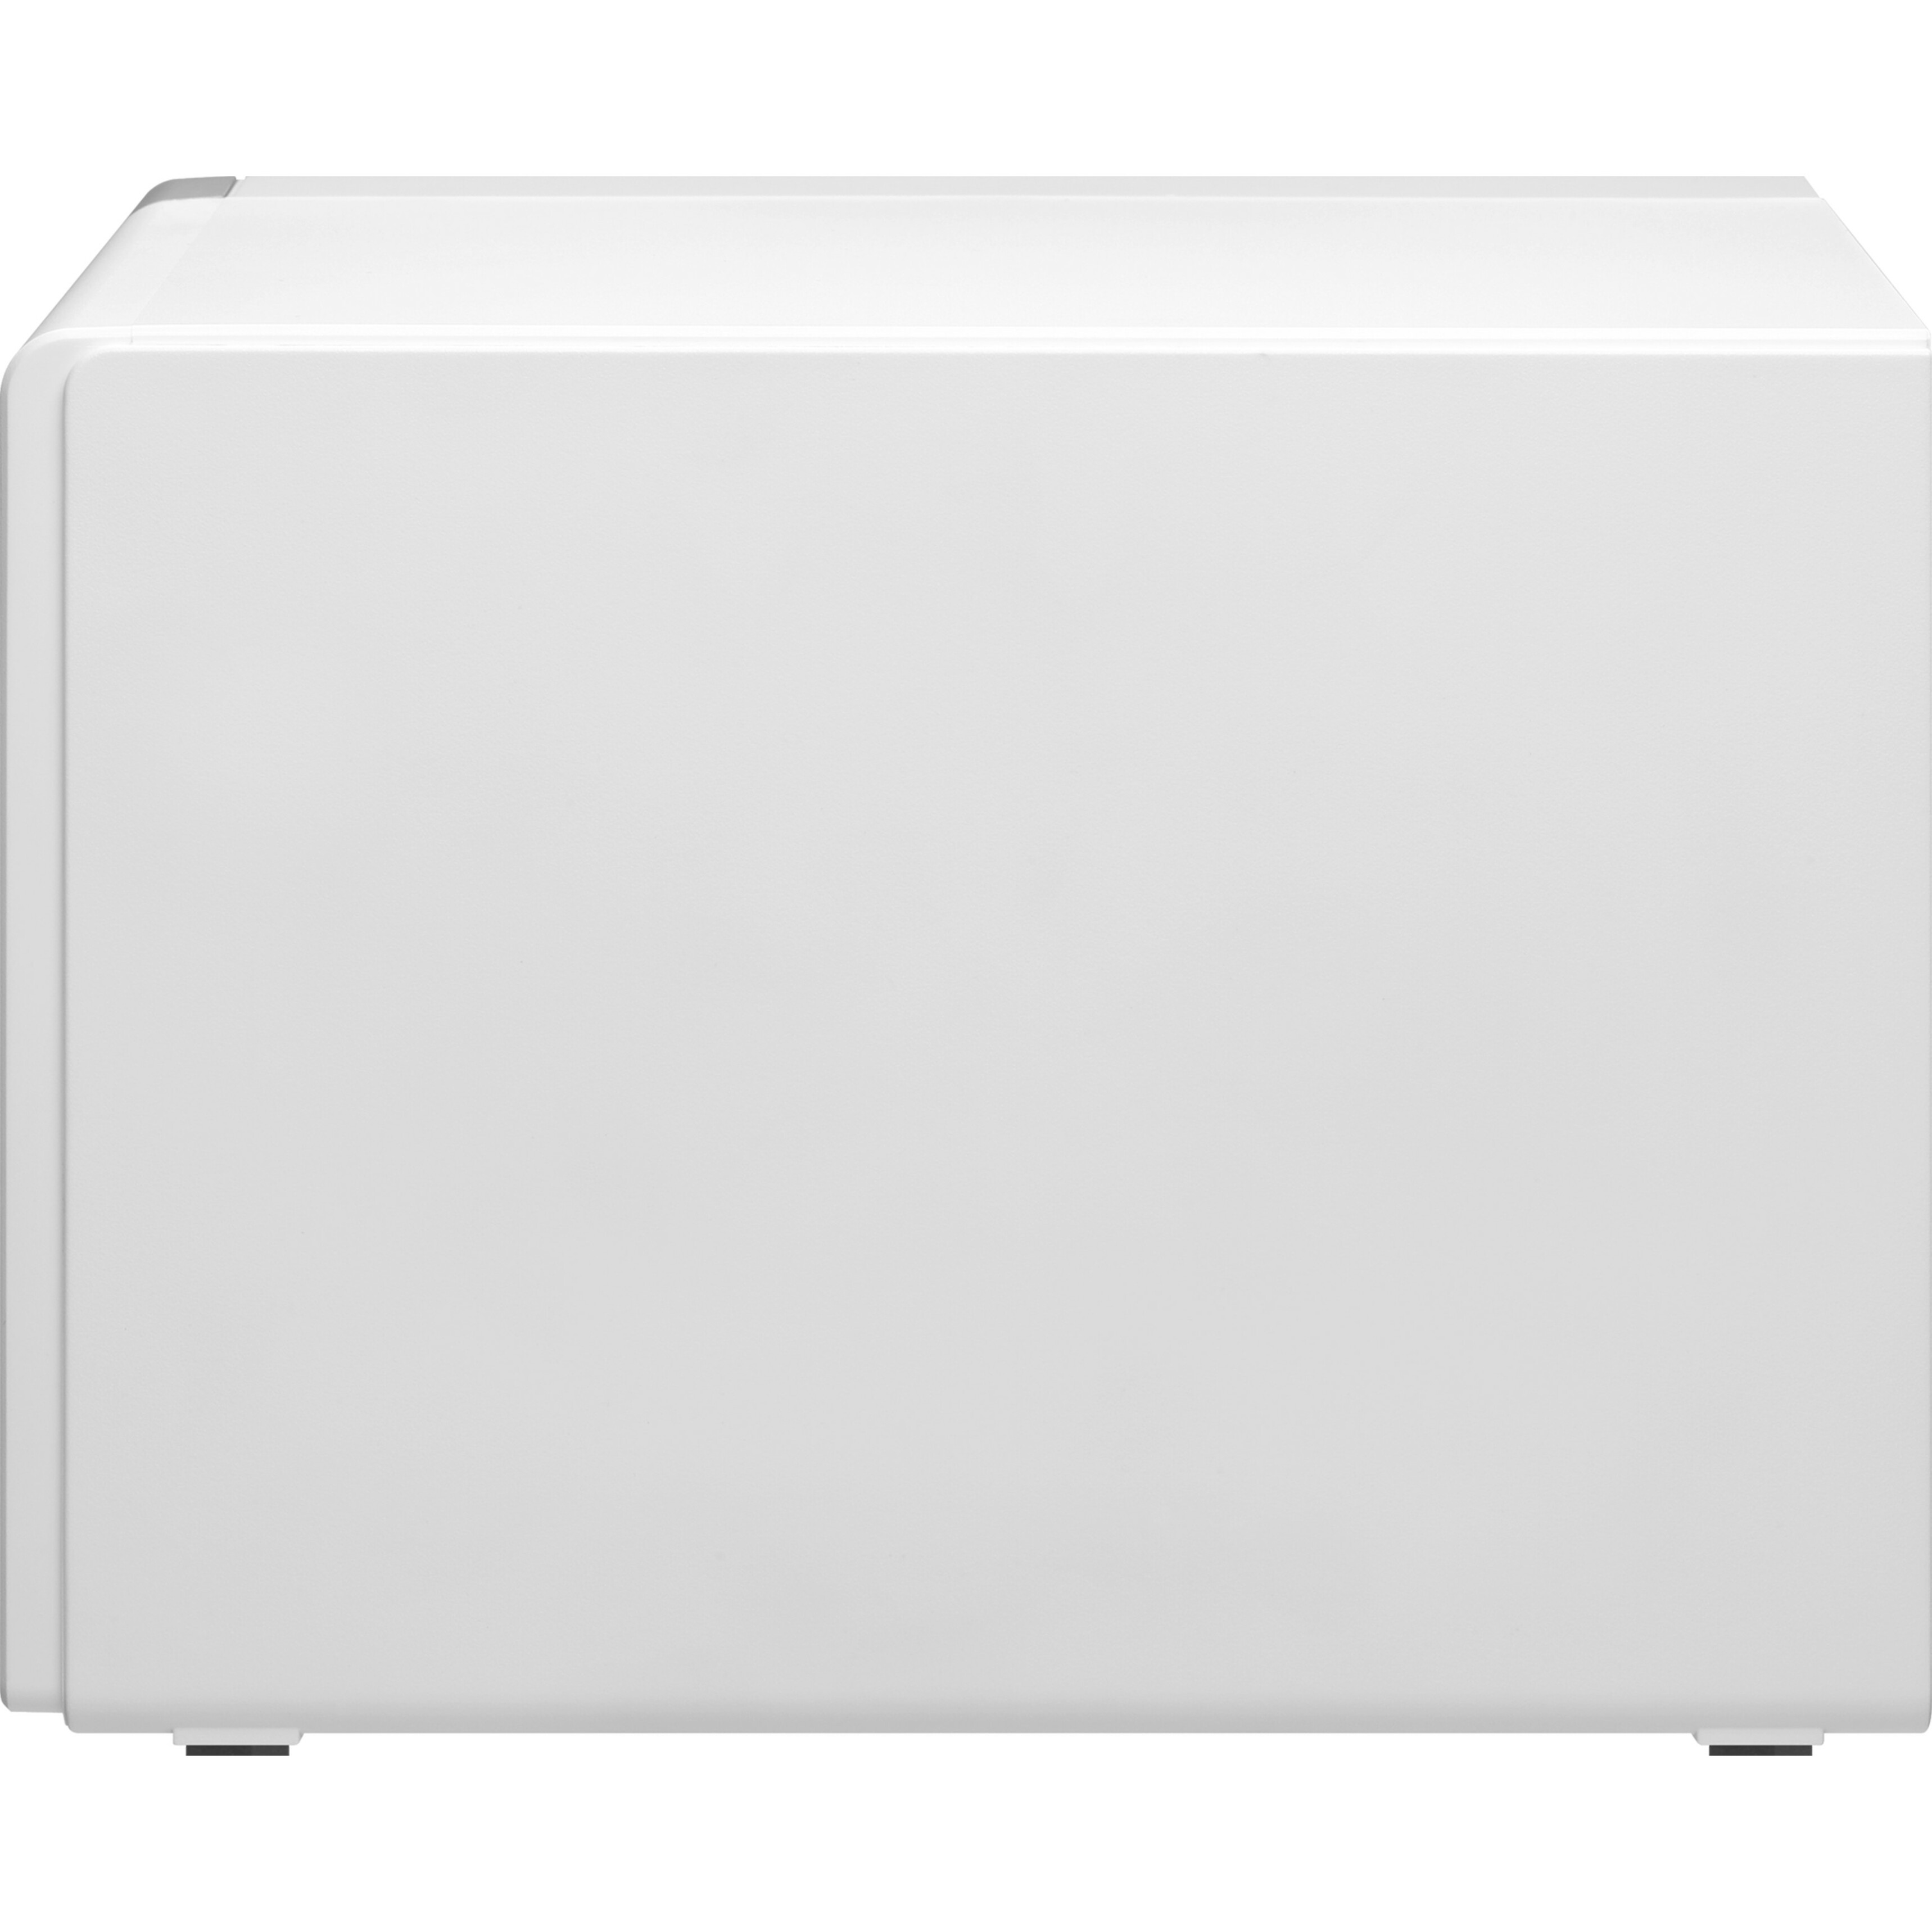 QNAP TS-431P2 4-bay Personal Cloud NAS with DLNA, 1GB RAM - image 2 of 9